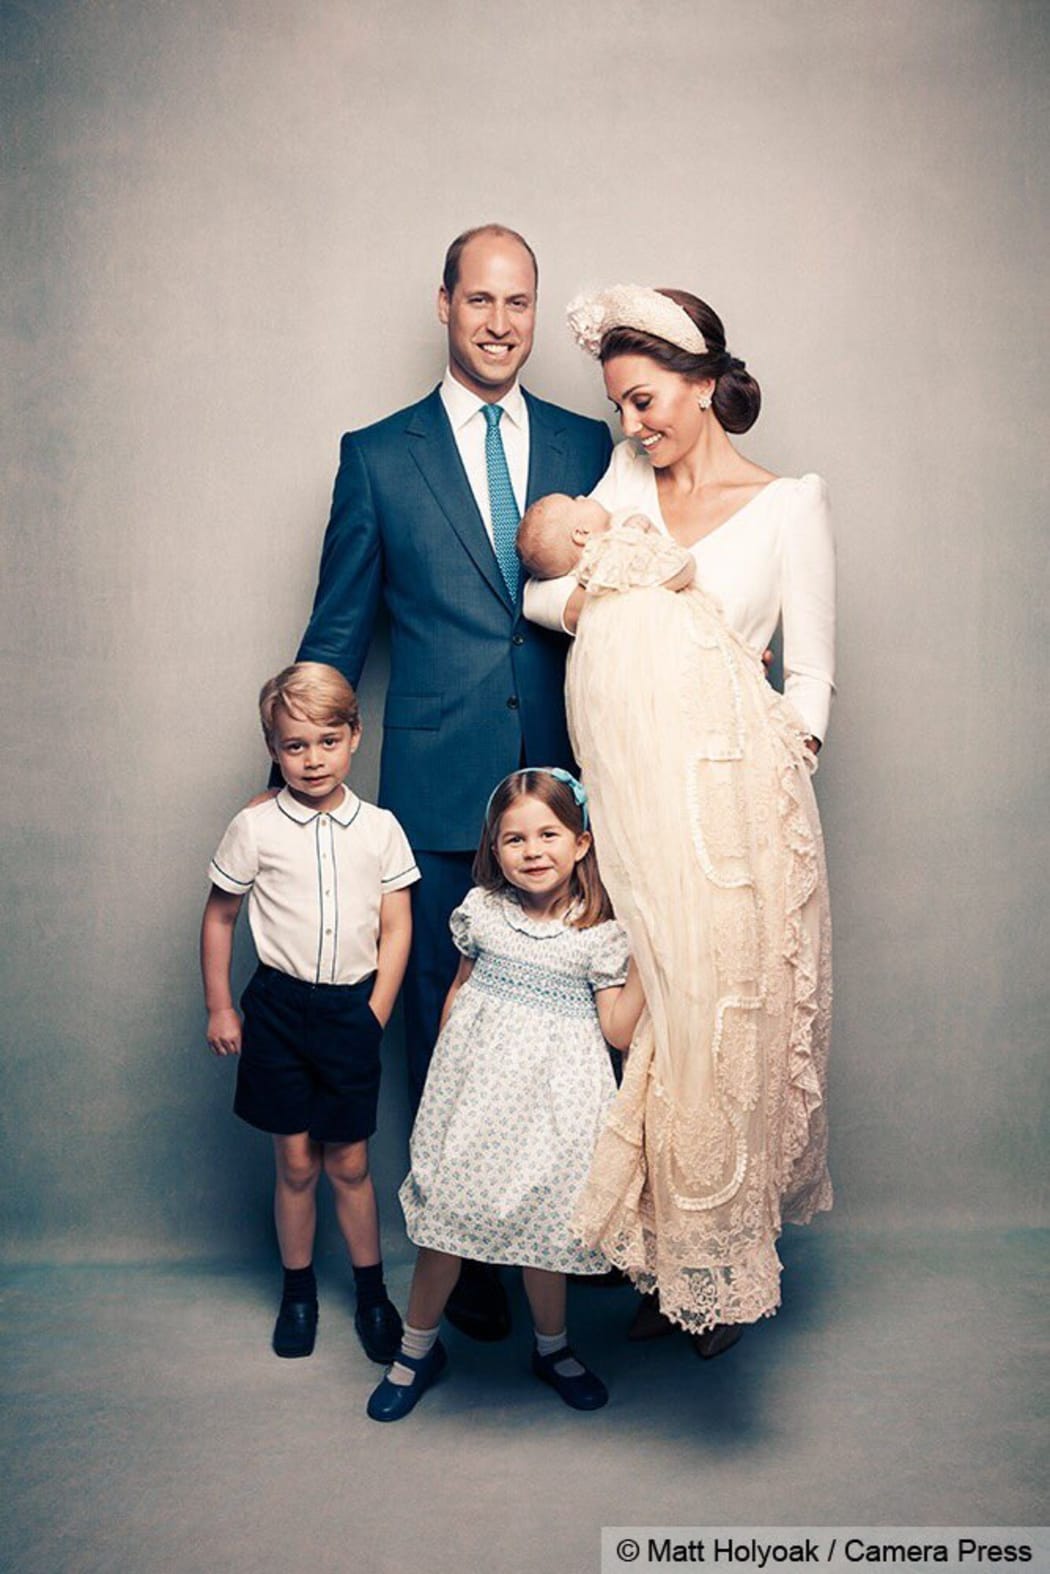 The Duke and Duchess of Cambridge released family photographs to mark the christening of their third child Prince Louis.